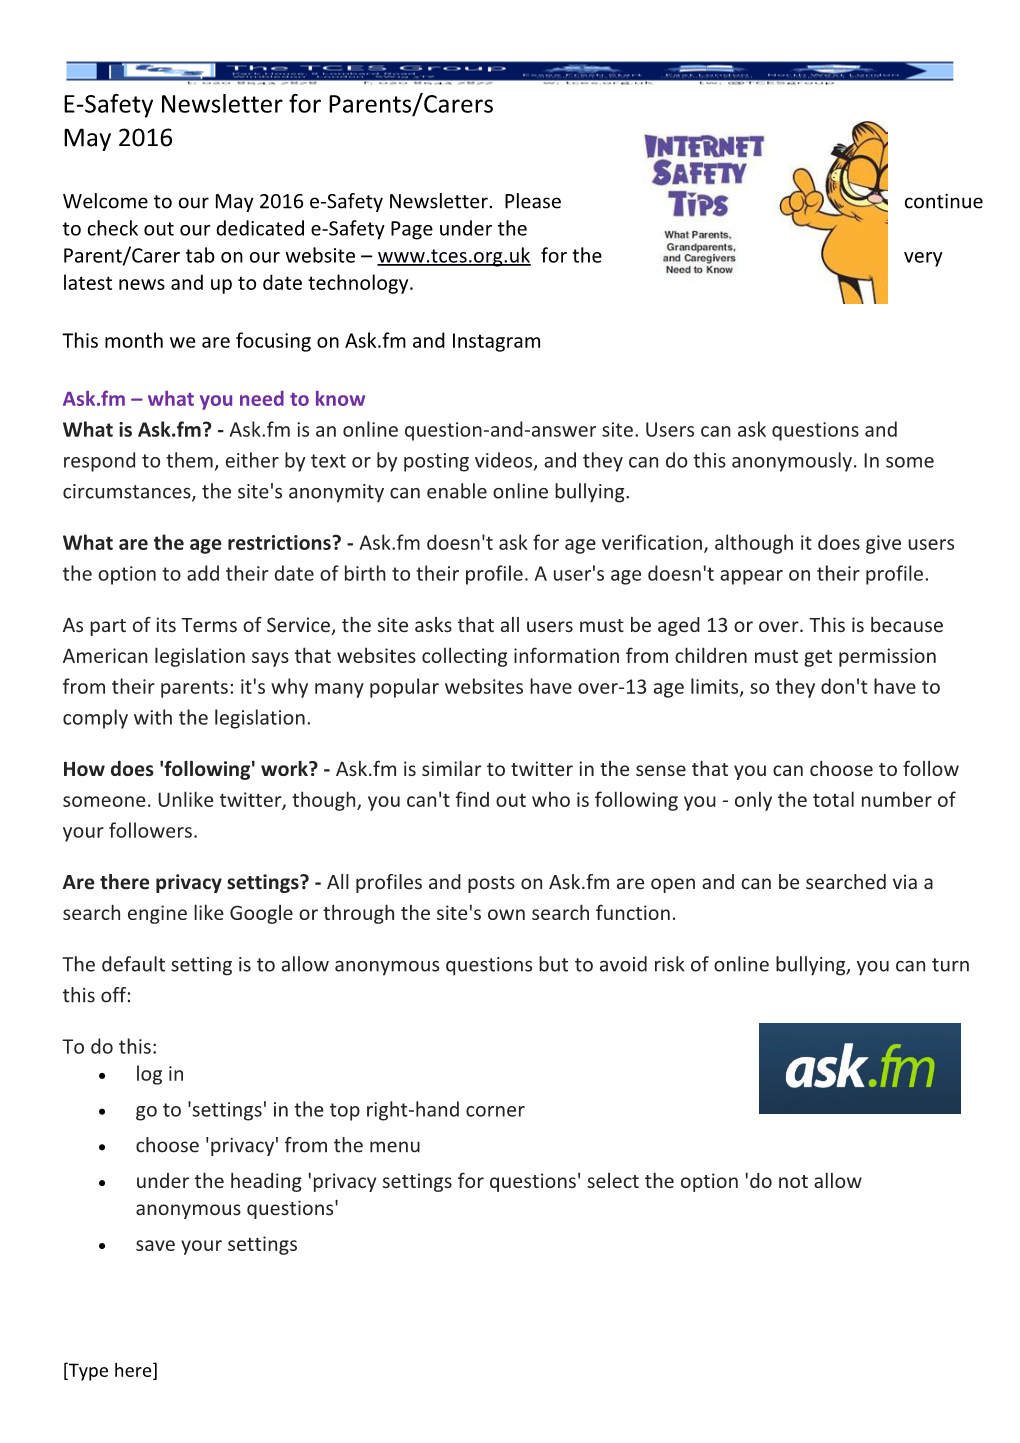 This Month We Are Focusing on Ask.Fm and Instagram